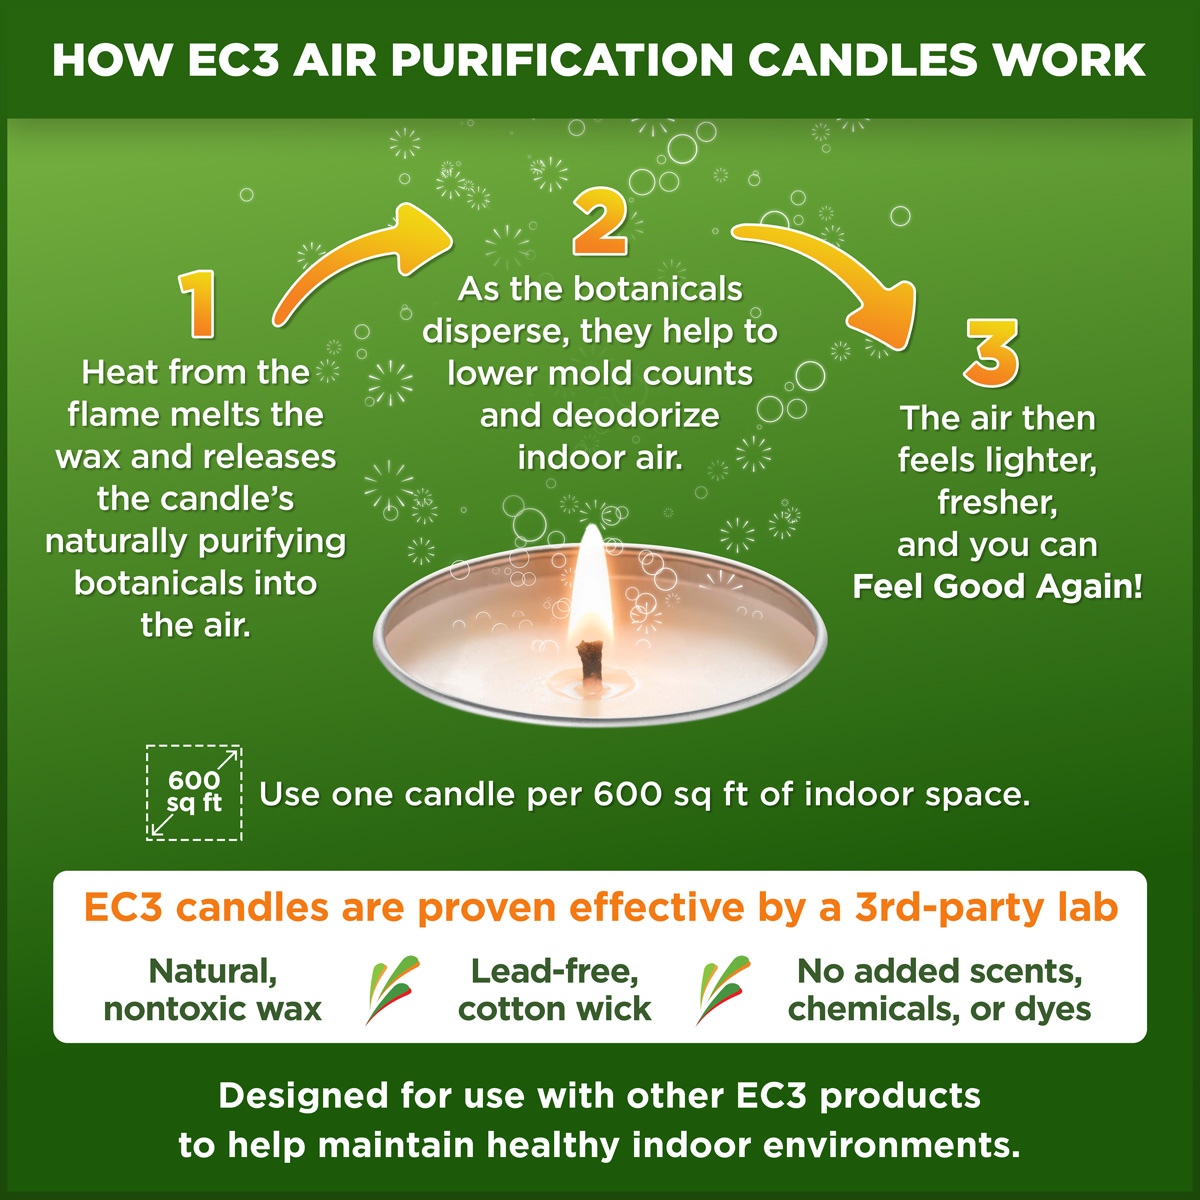 EC3 AIR PURIFICATION Candle - Reduces Levels of Mold Spores in Your Home  £14.20 - PicClick UK